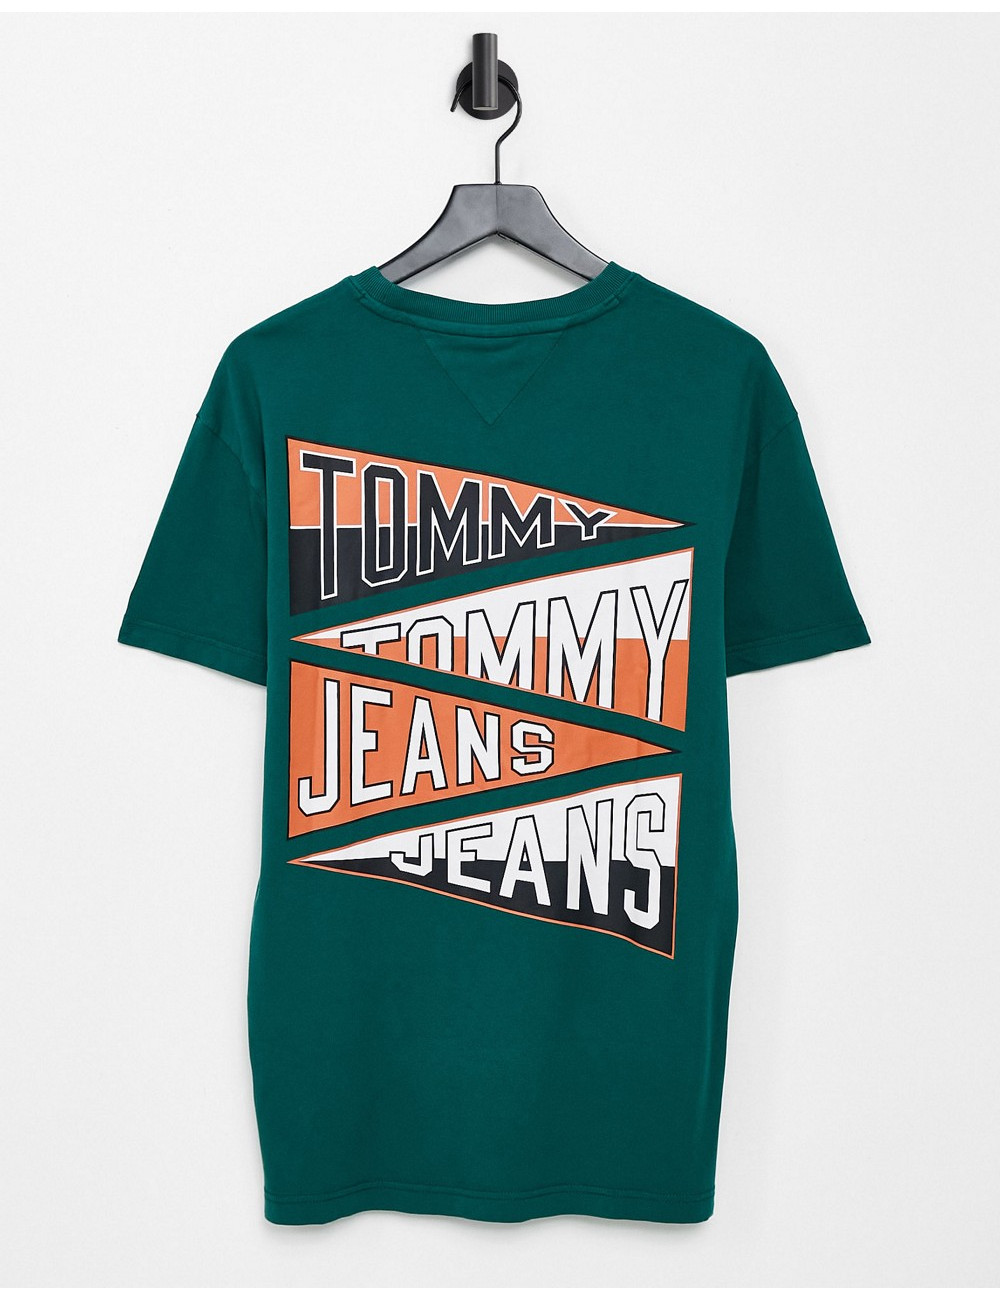 Tommy Jeans repeat college...